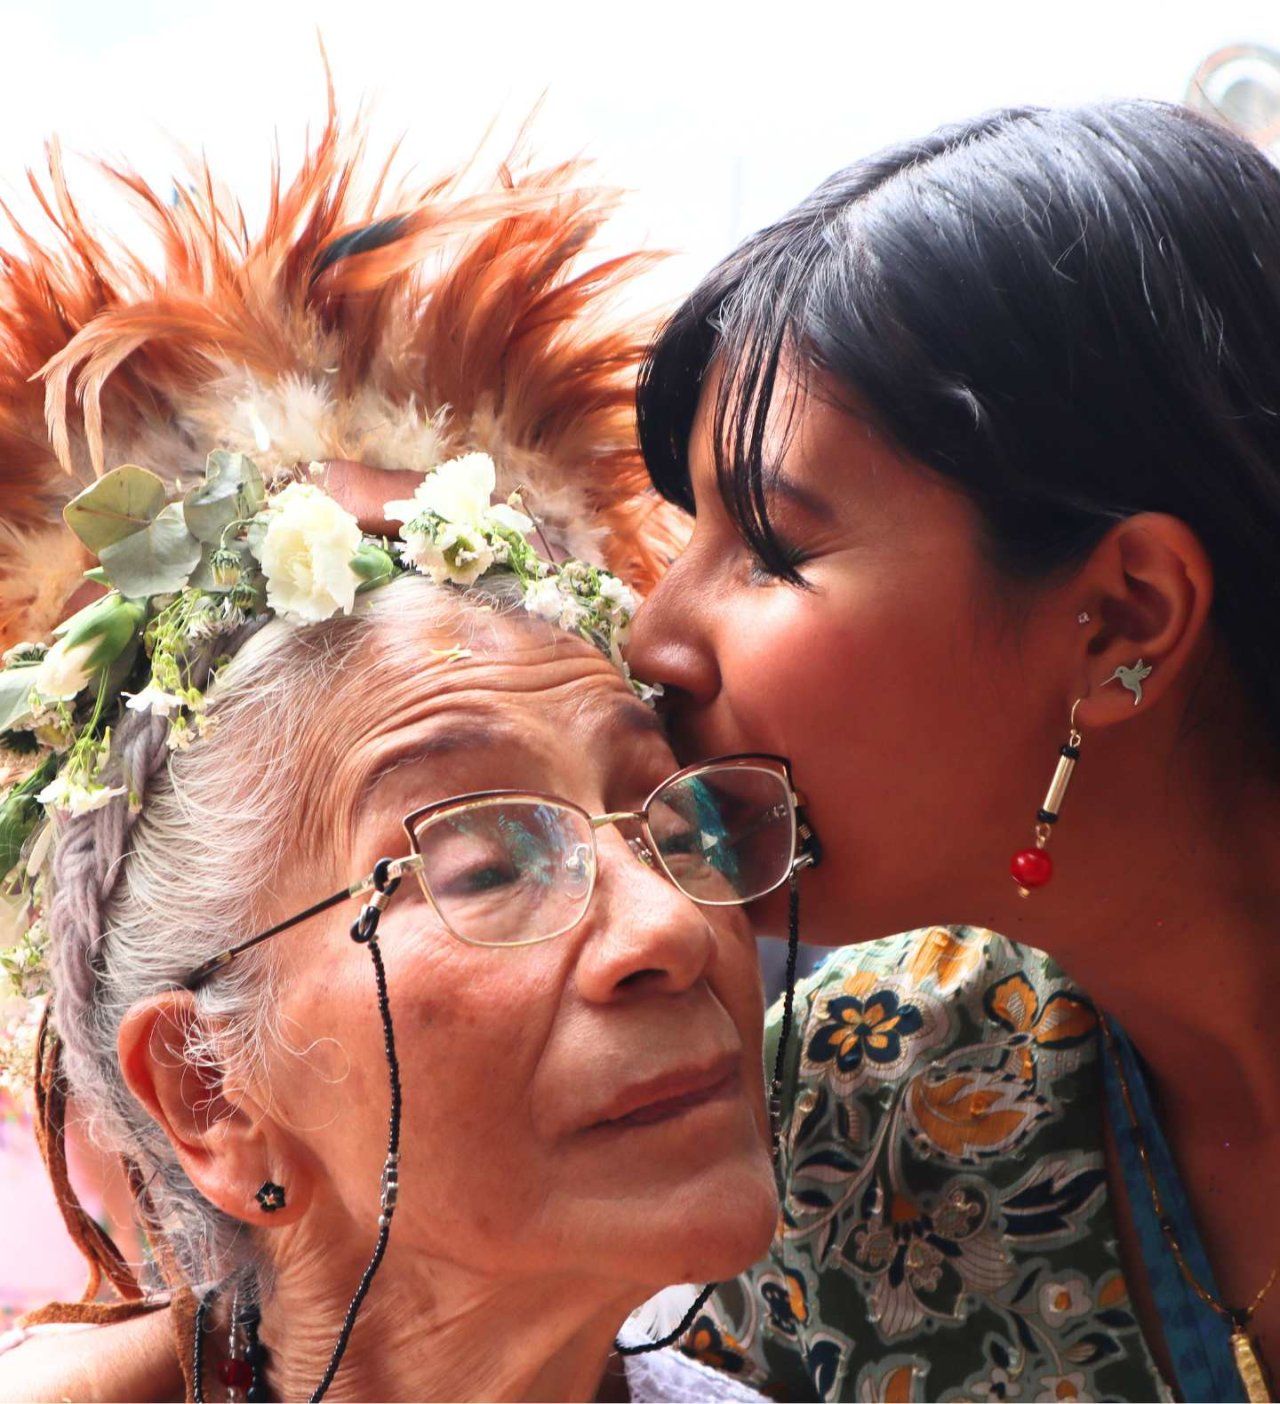 Elderly woman with flowers in hair receives a kiss by Fullbright scholar